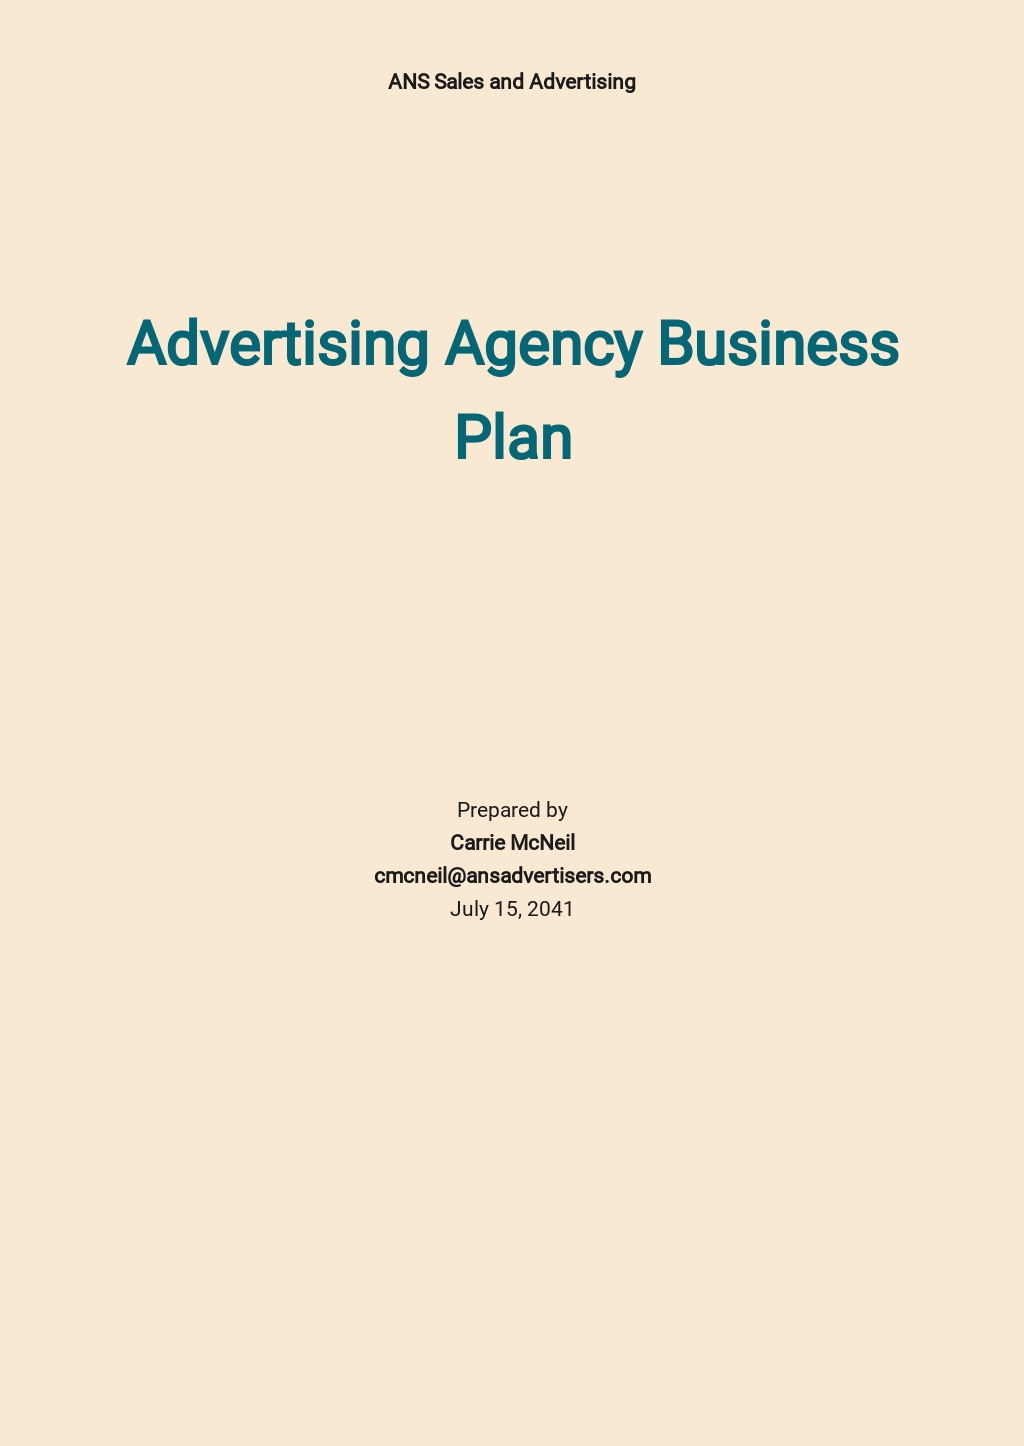 Advertising Agency Business Plan Template - Google Docs, Word, Apple Pages, PDF